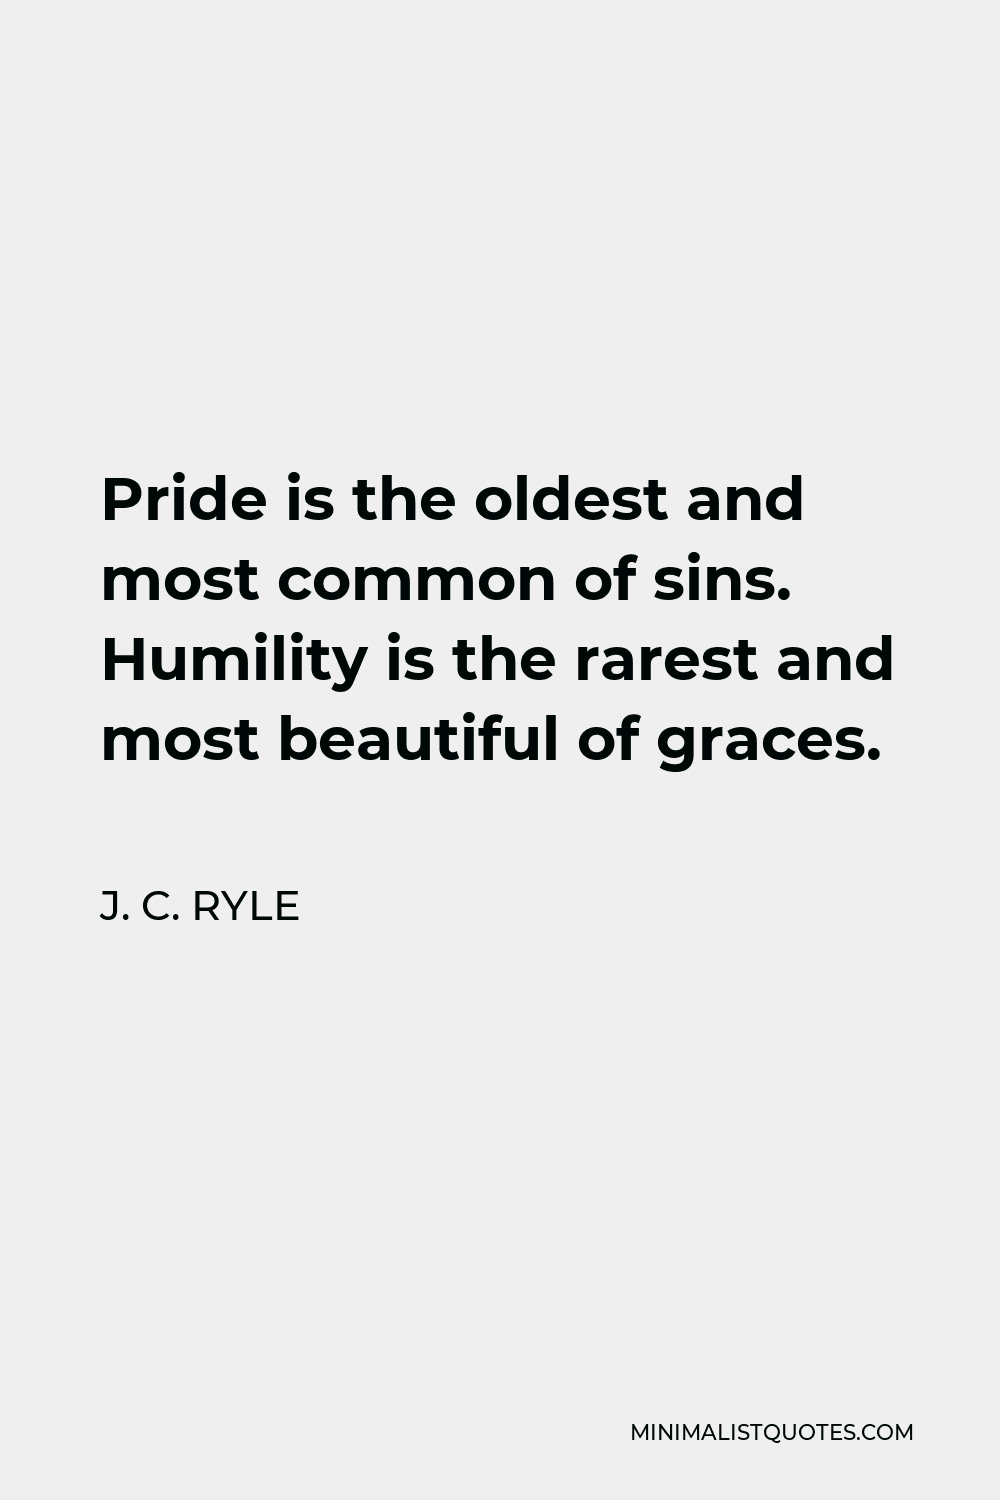 J. C. Ryle Quote - Pride is the oldest and most common of sins. Humility is the rarest and most beautiful of graces.